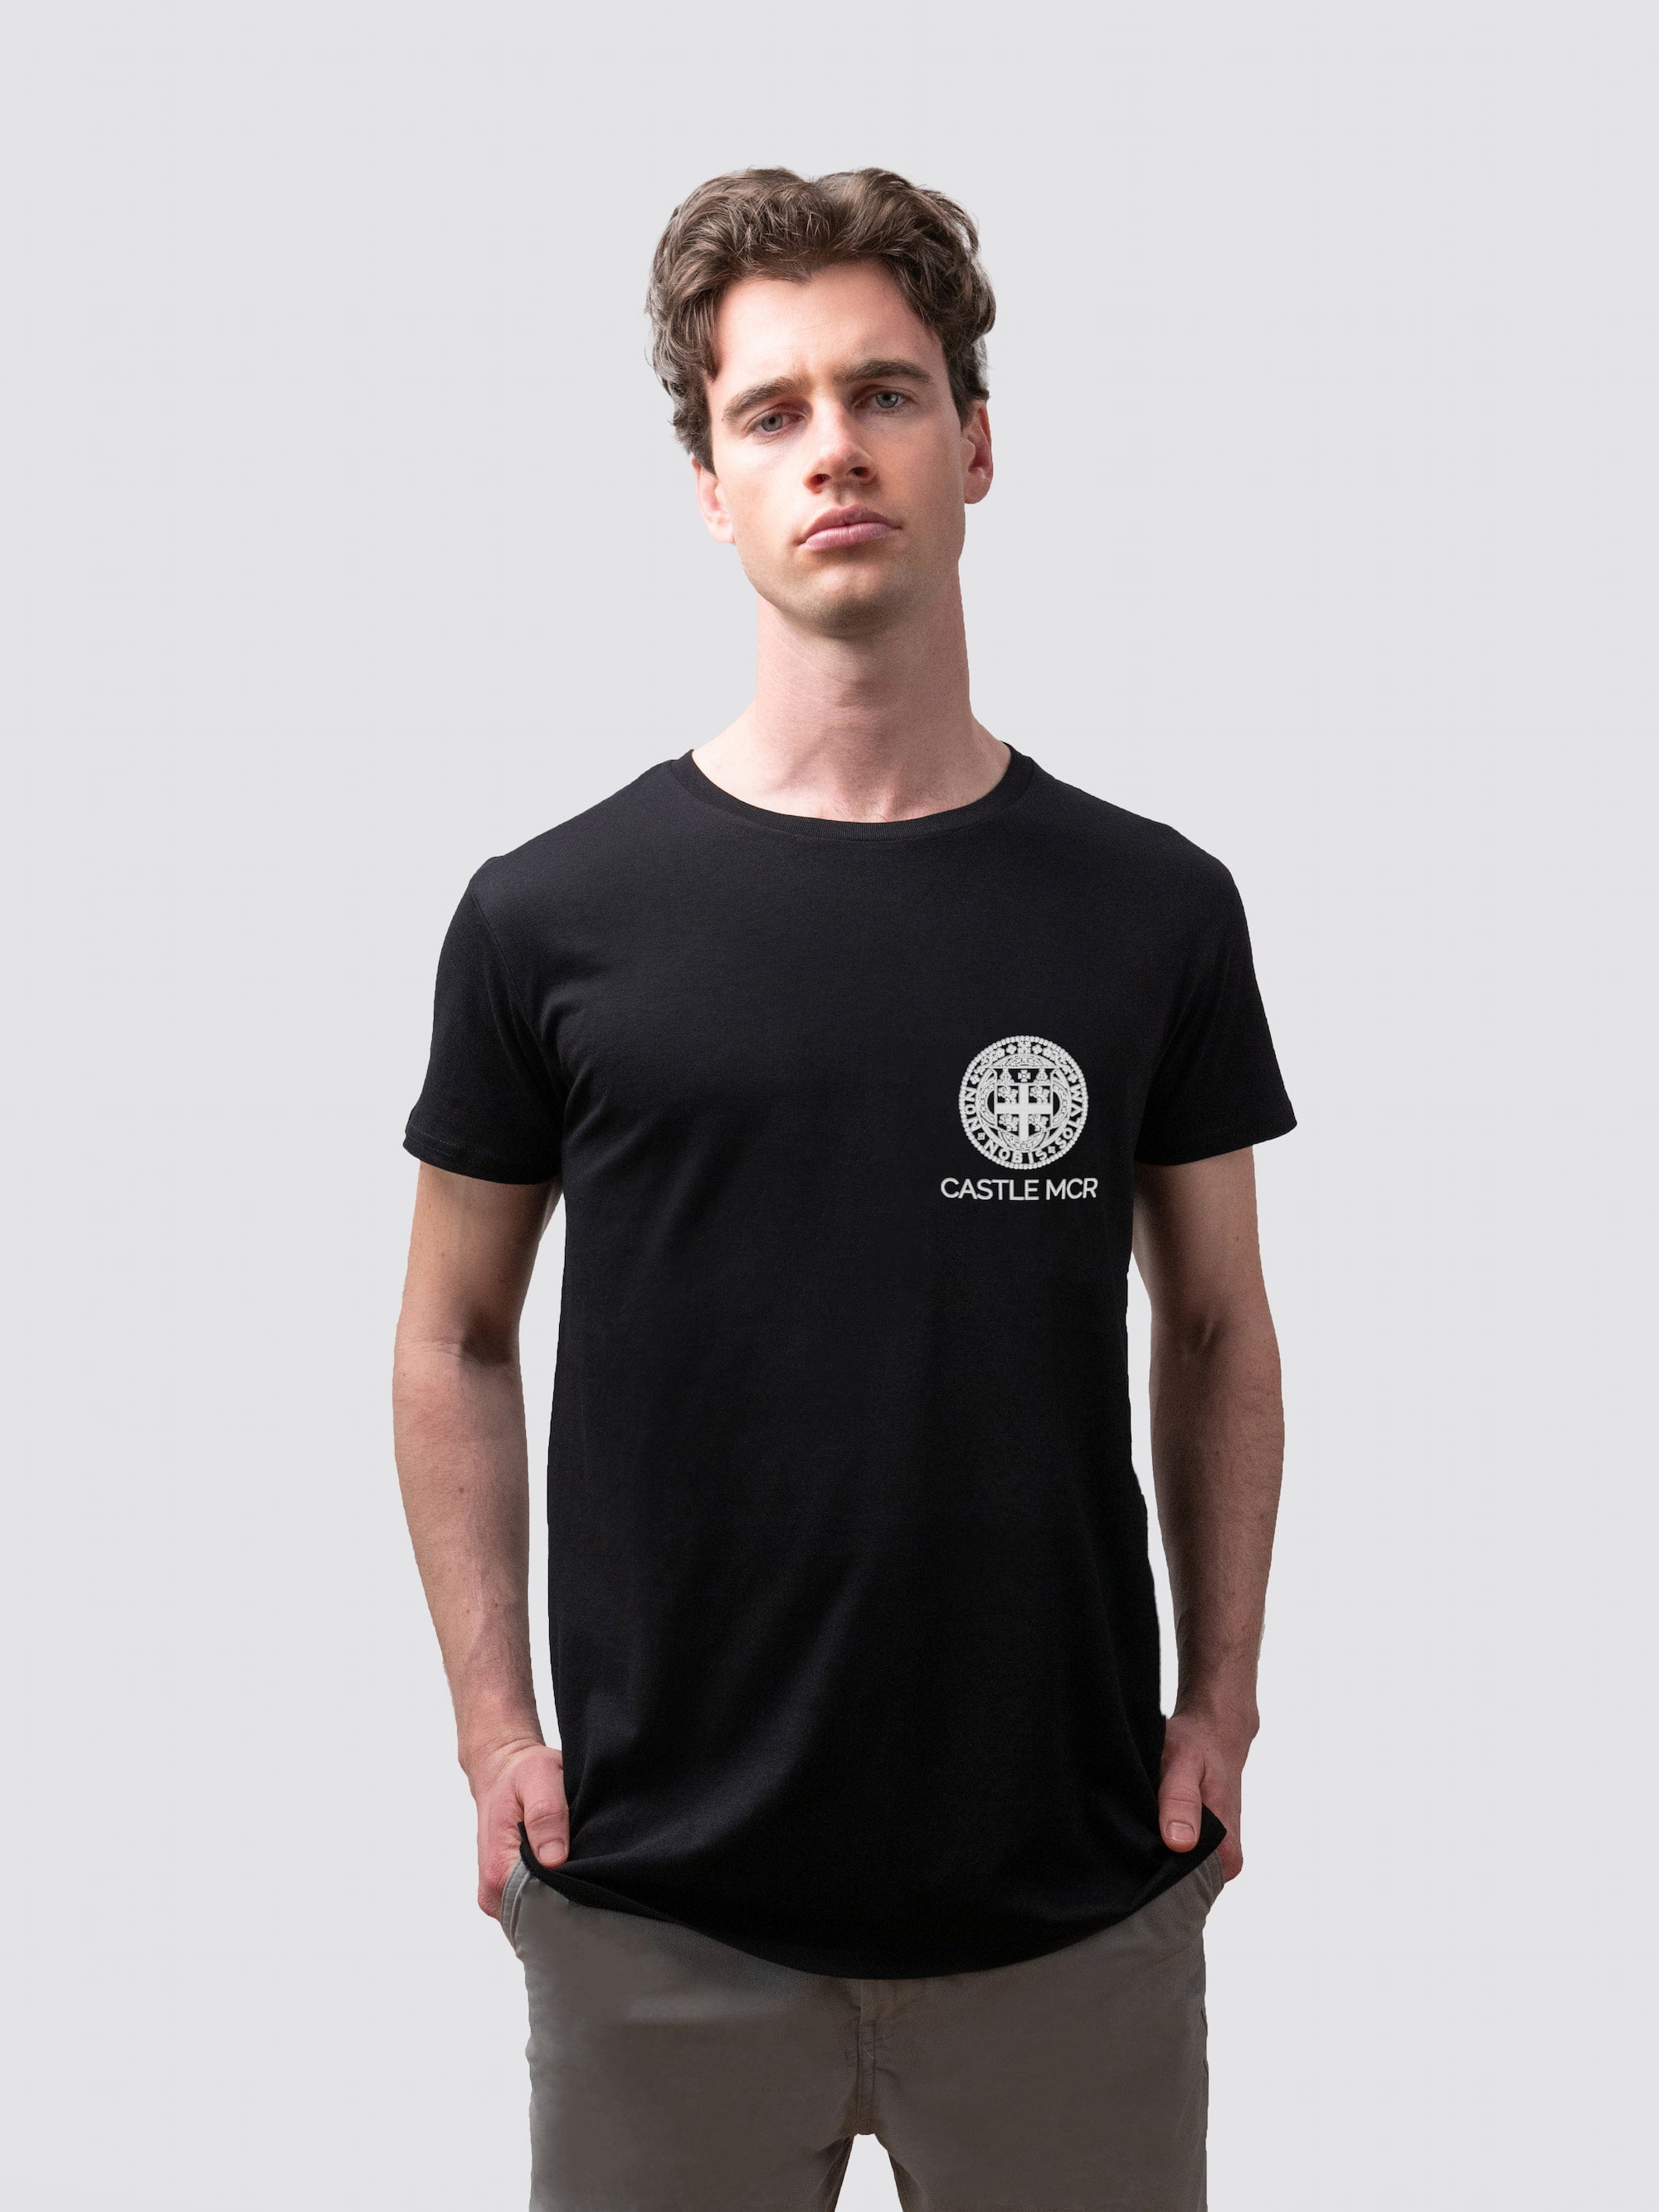 Sustainable Castle MCR t-shirt, made from organic cotton